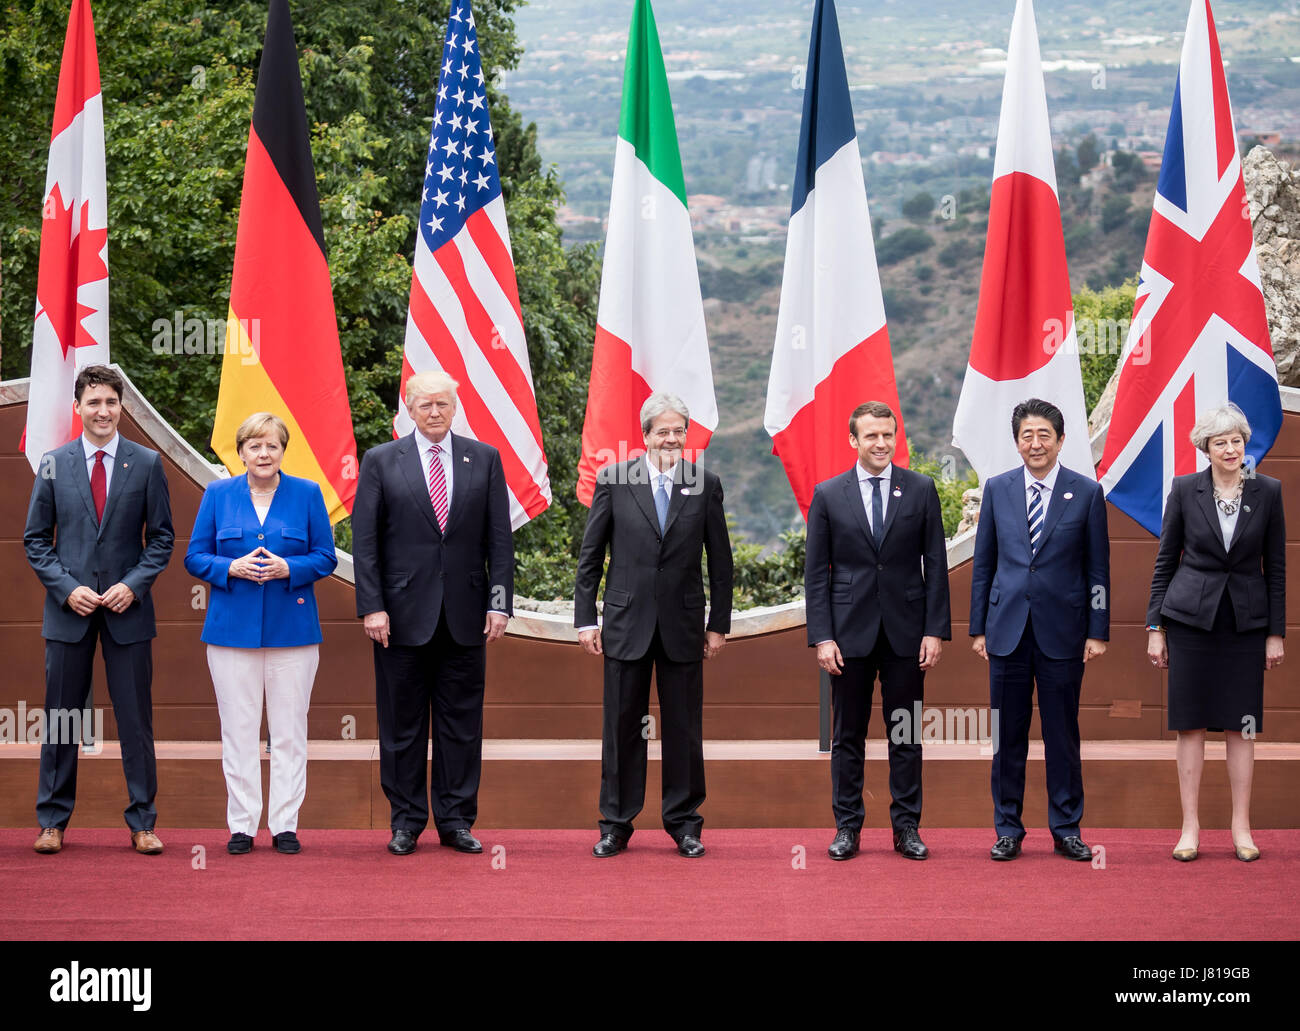 Sicily, Italy. 26th May, 2017. Sicily, Italy. 26th May, 2017. Canada's Prime Minister Justin Trudeau (L-R) poses next to Germany's Chancellor Angela Merken, US President Donald Trump, Italy's Minister President Paolo Gentiloni, President of France Emmanuel Macron, Japan's Shinzo Abe and Britain's Theresa May for the 'family portrait' in front of the Ancient Greek theatre at the G7 summit in Taormina in Sicily, Italy, 26 May 2017. The heads of the G7 states meet in Sicily from 26 May until 27 May 2017. Credit: dpa/Alamy Live News Stock Photo